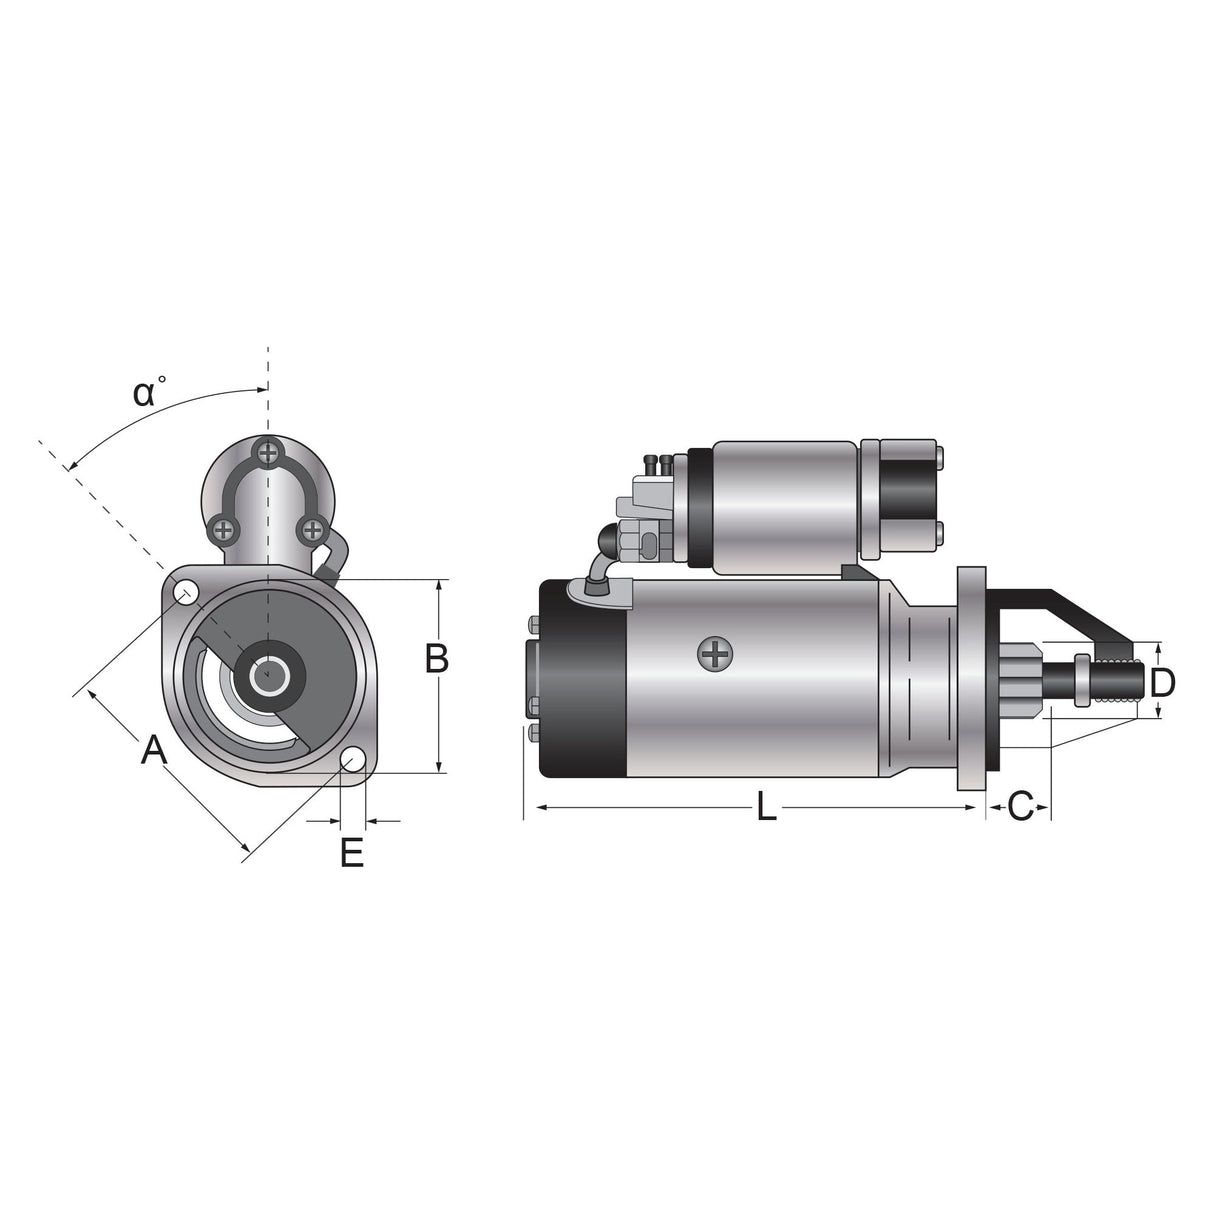 Starter Motor  - 12V, 1.7Kw, Gear Reducted (Mahle)
 - S.36149 - Farming Parts